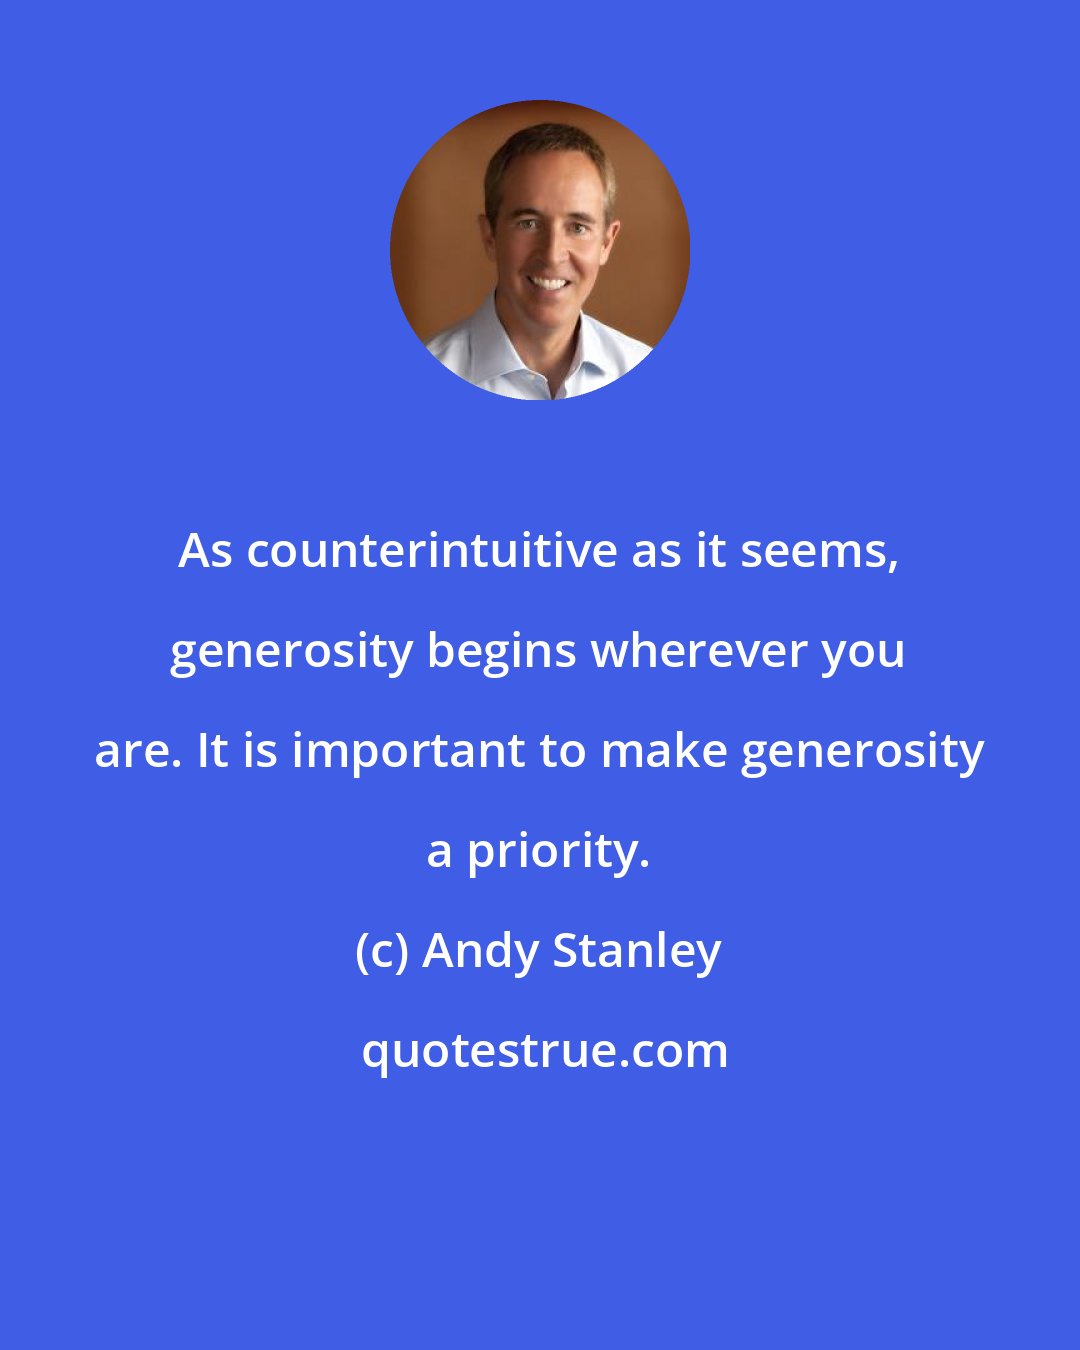 Andy Stanley: As counterintuitive as it seems, generosity begins wherever you are. It is important to make generosity a priority.